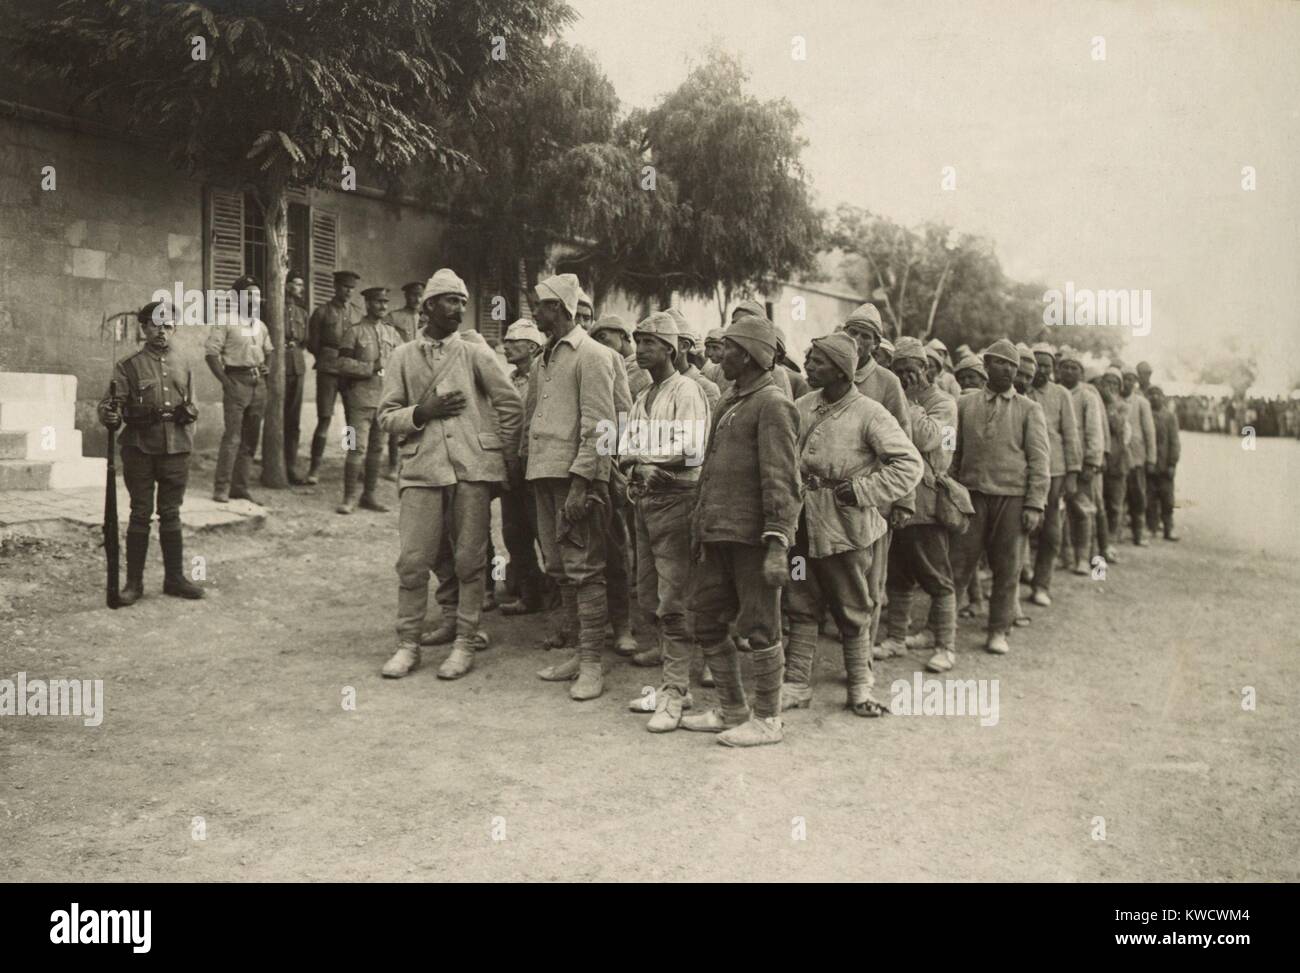 Turkish POWS captured in northern Palestine in 1918. The British offensive of Sept.-Oct, 1918 moved north from Jerusalem and reached Beirut and Damascus. Ottoman forces retreated or were captured (BSLOC 2017 1 161) Stock Photo